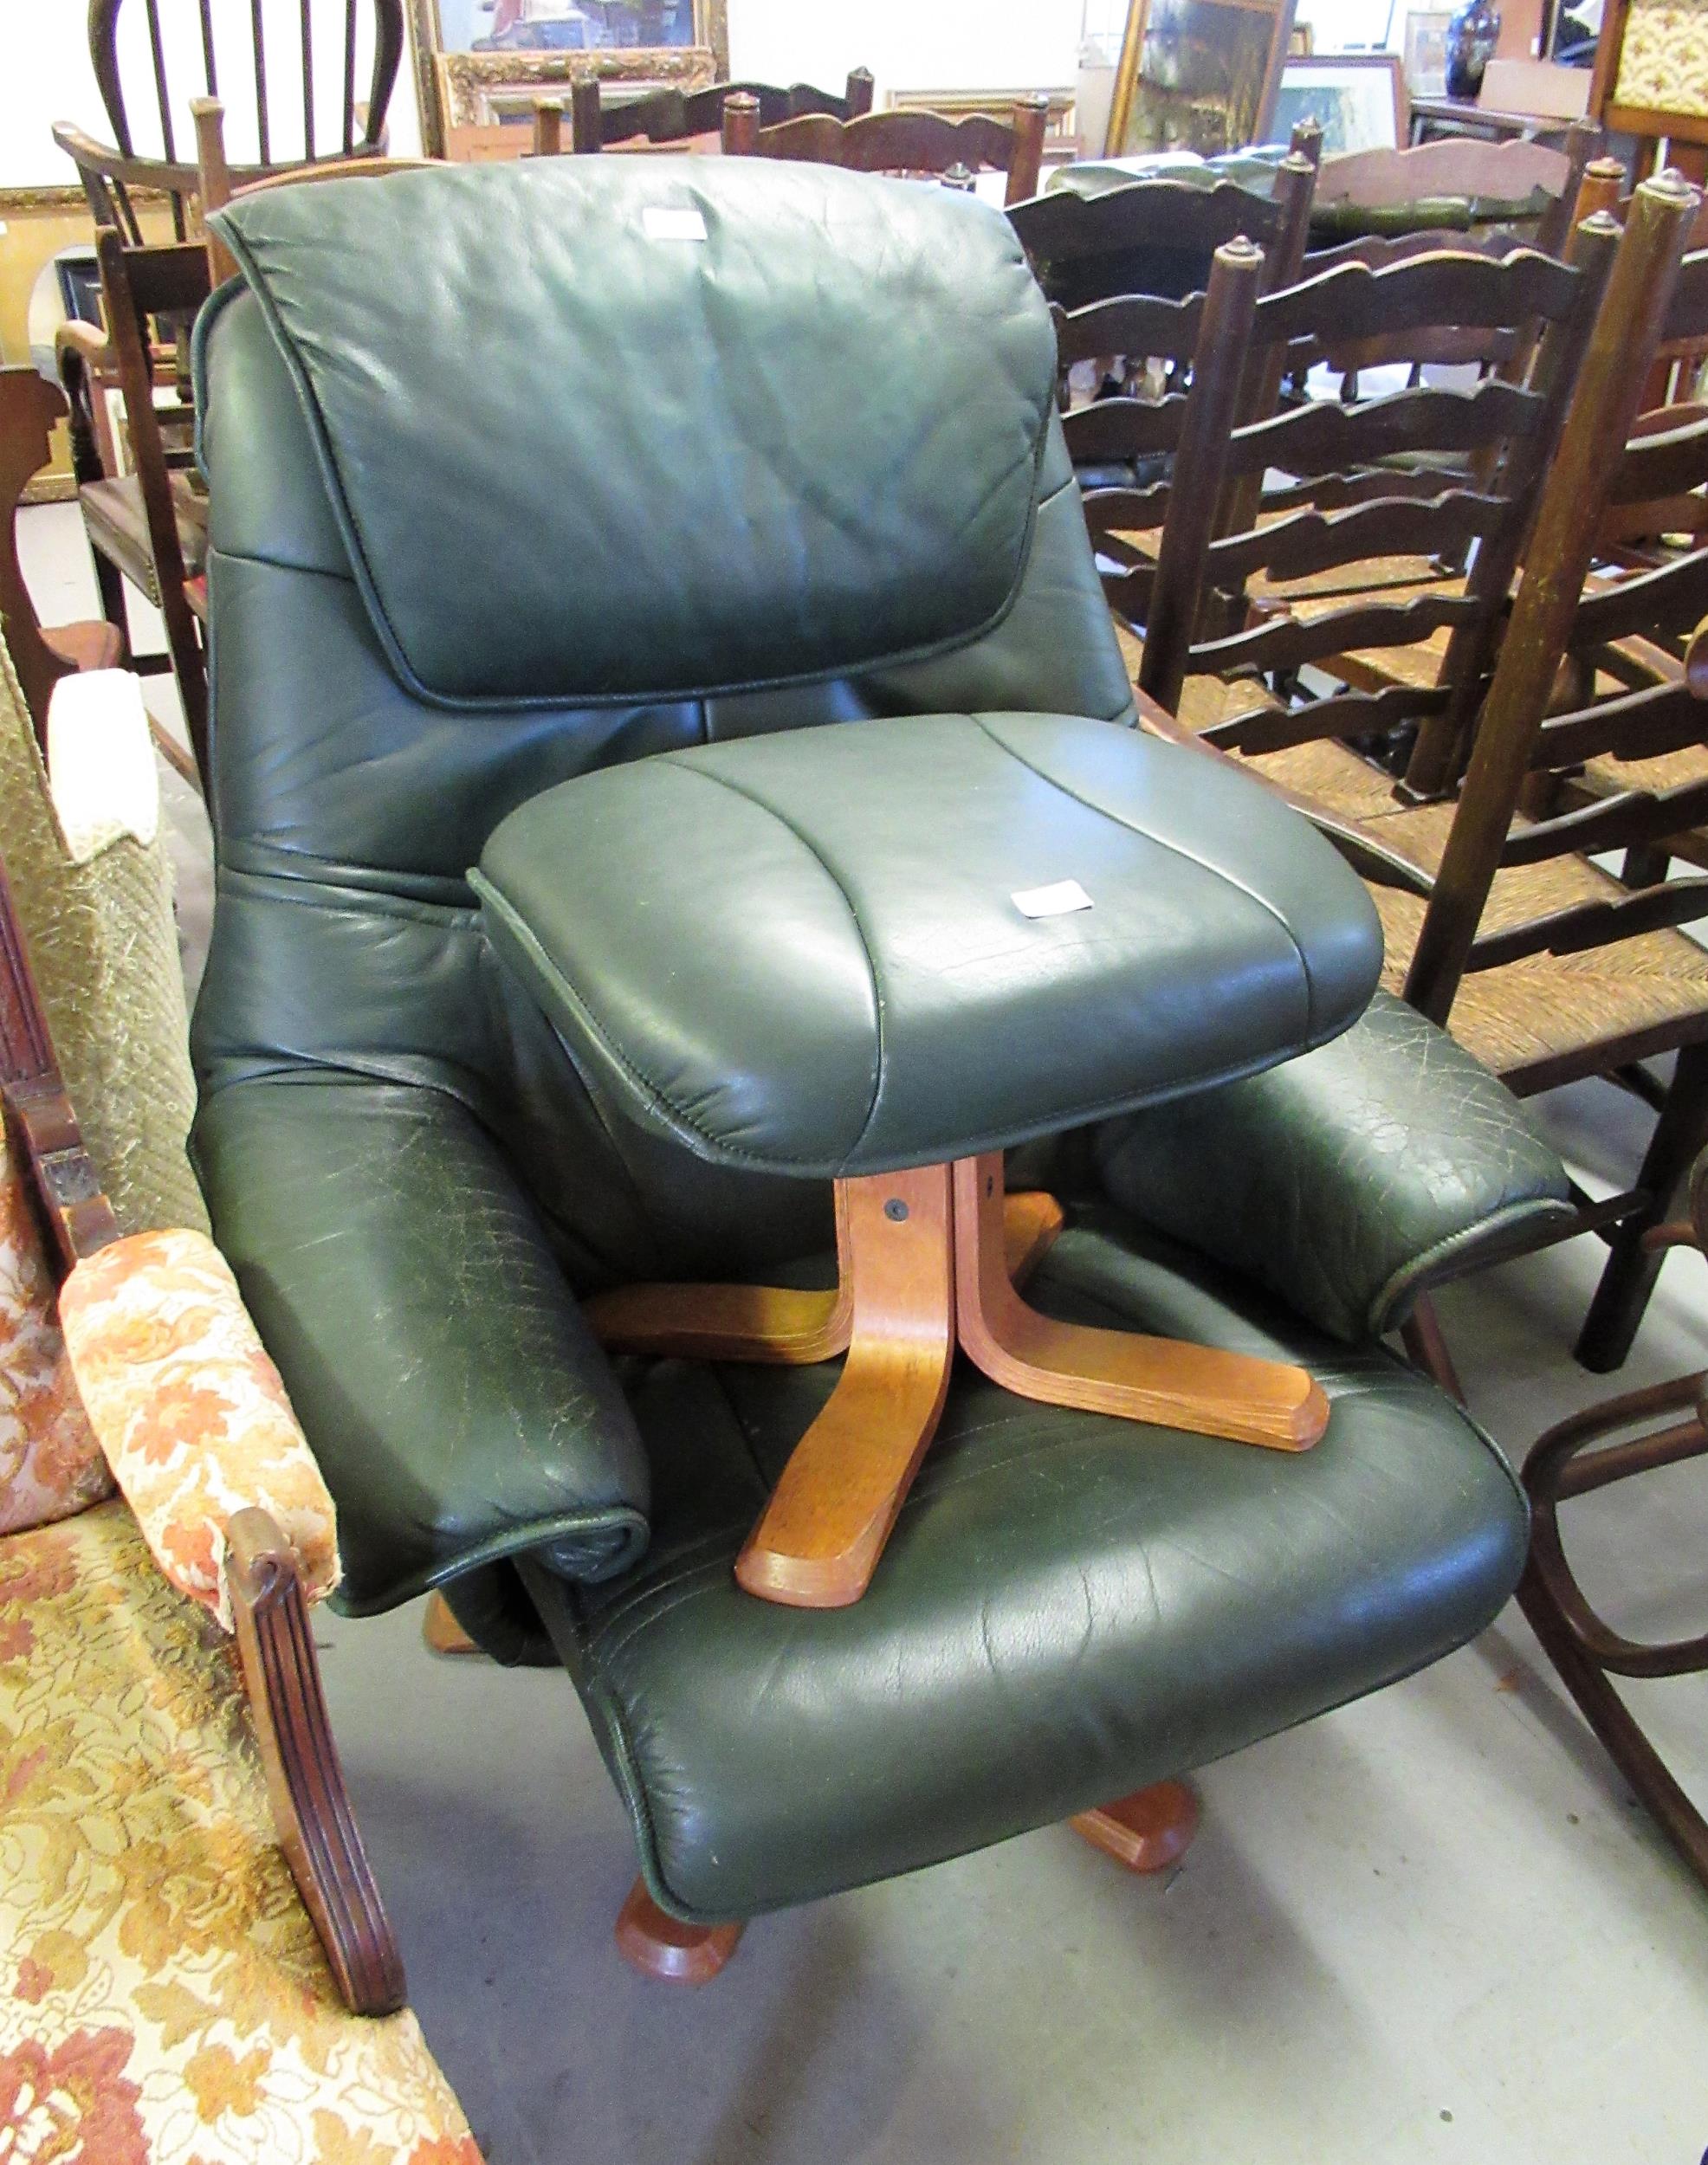 Modern green leather upholstered recliner chair with matching stool